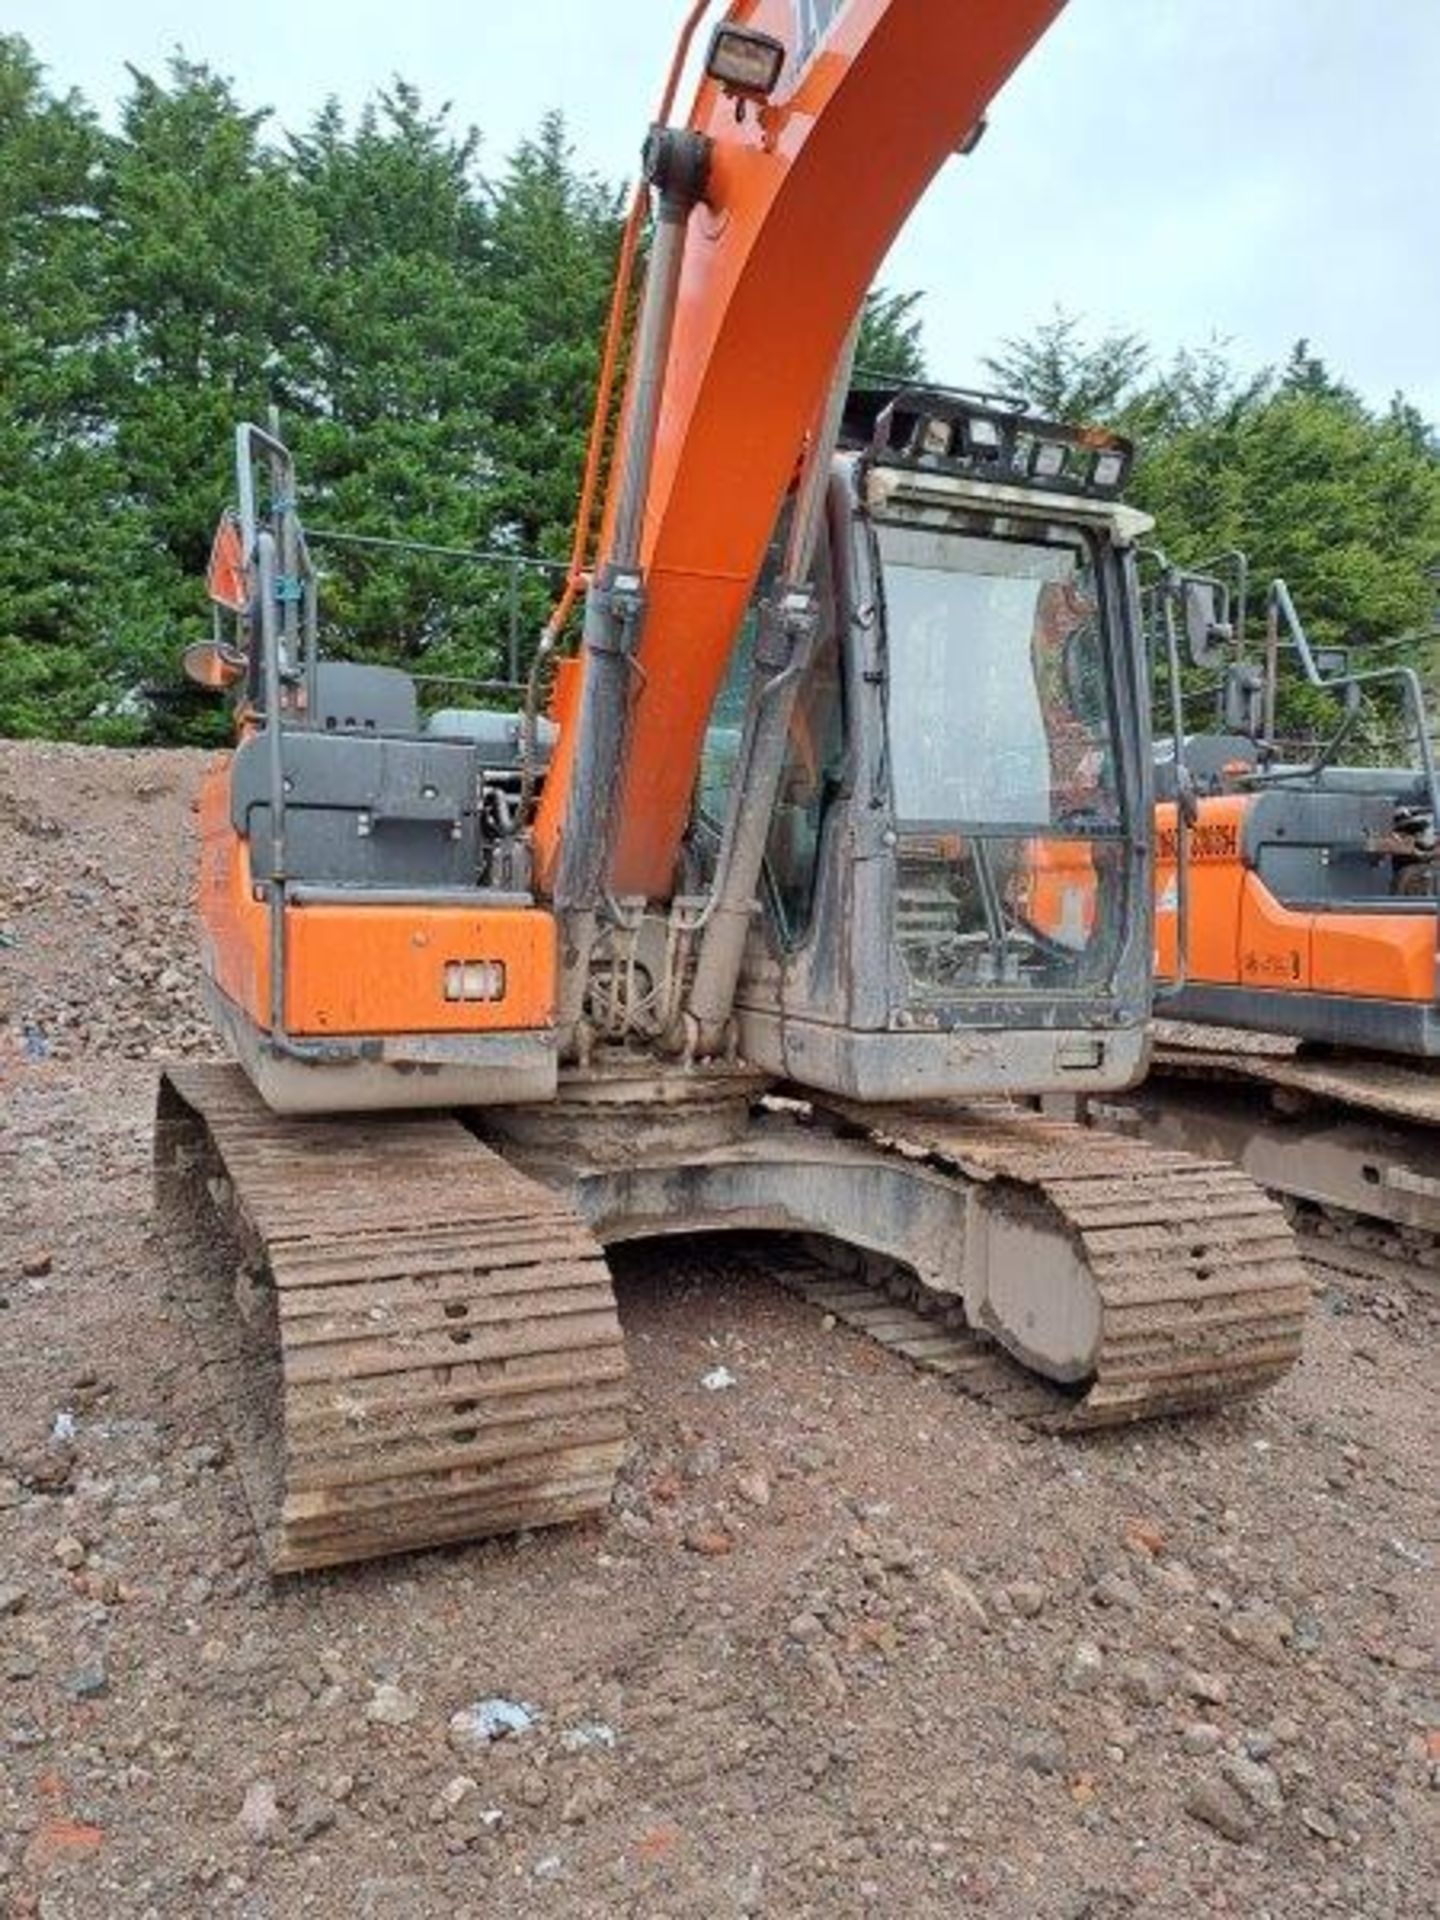 Doosan DX140LC-5 14t excavator, serial no. DHKCEBBRCH0001494, Year: 2017, Hours: 7,418, Key: 1, with - Image 12 of 18